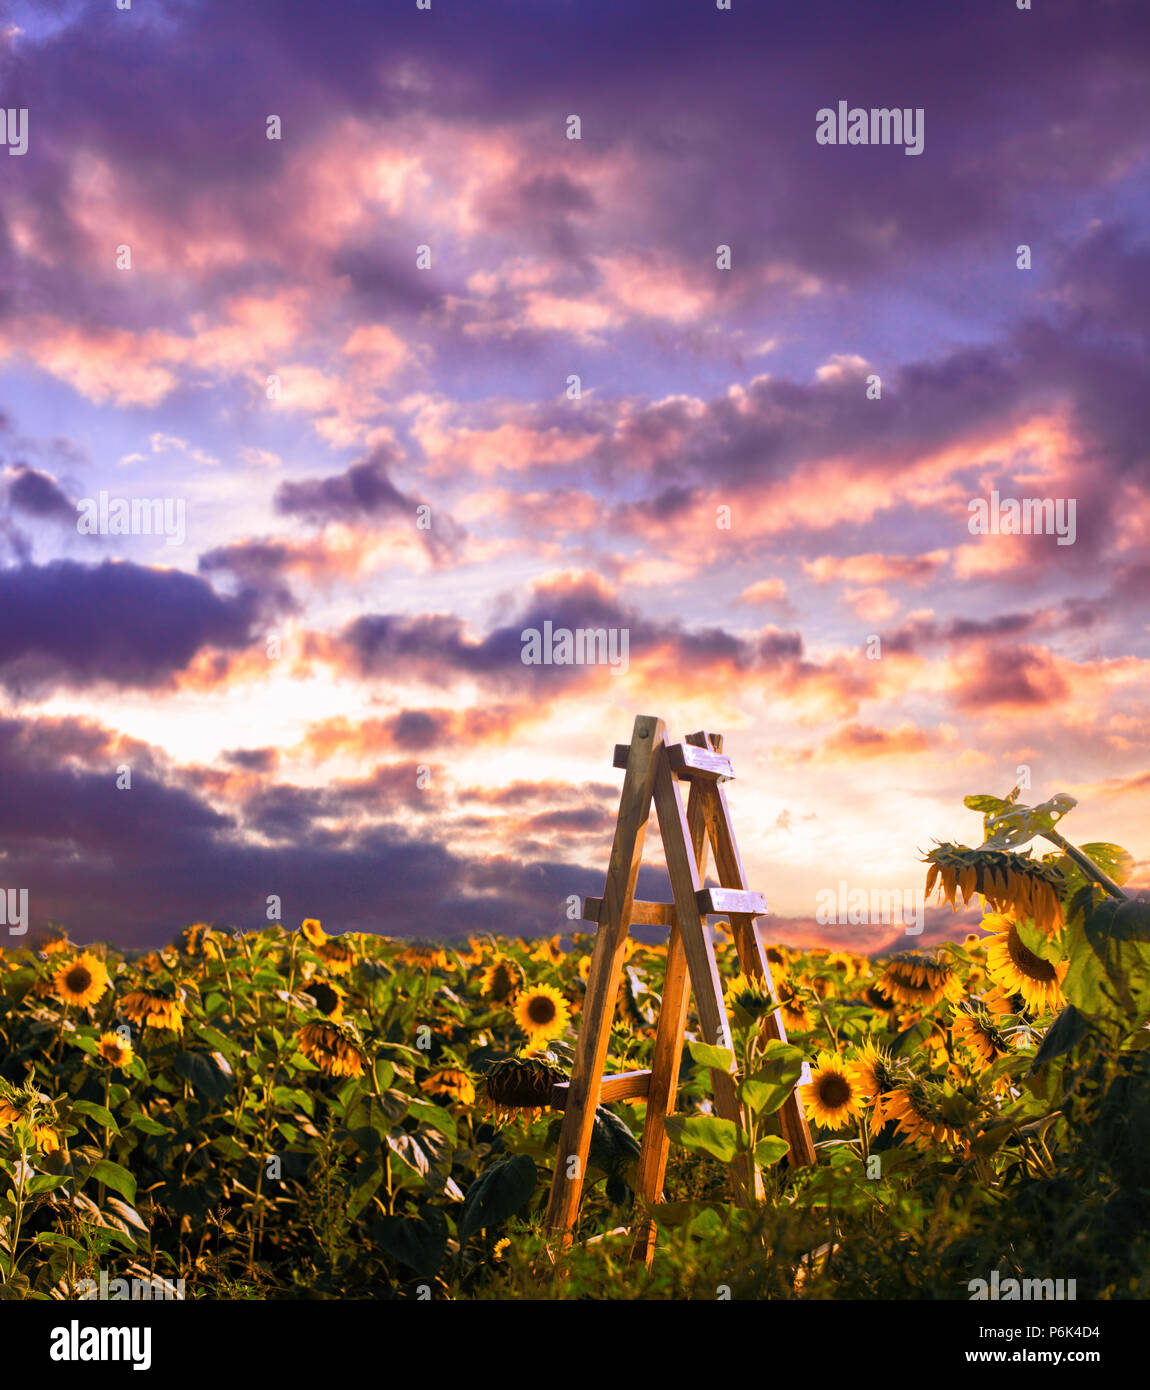 Wooden ladder at the sunflowers field Stock Photo